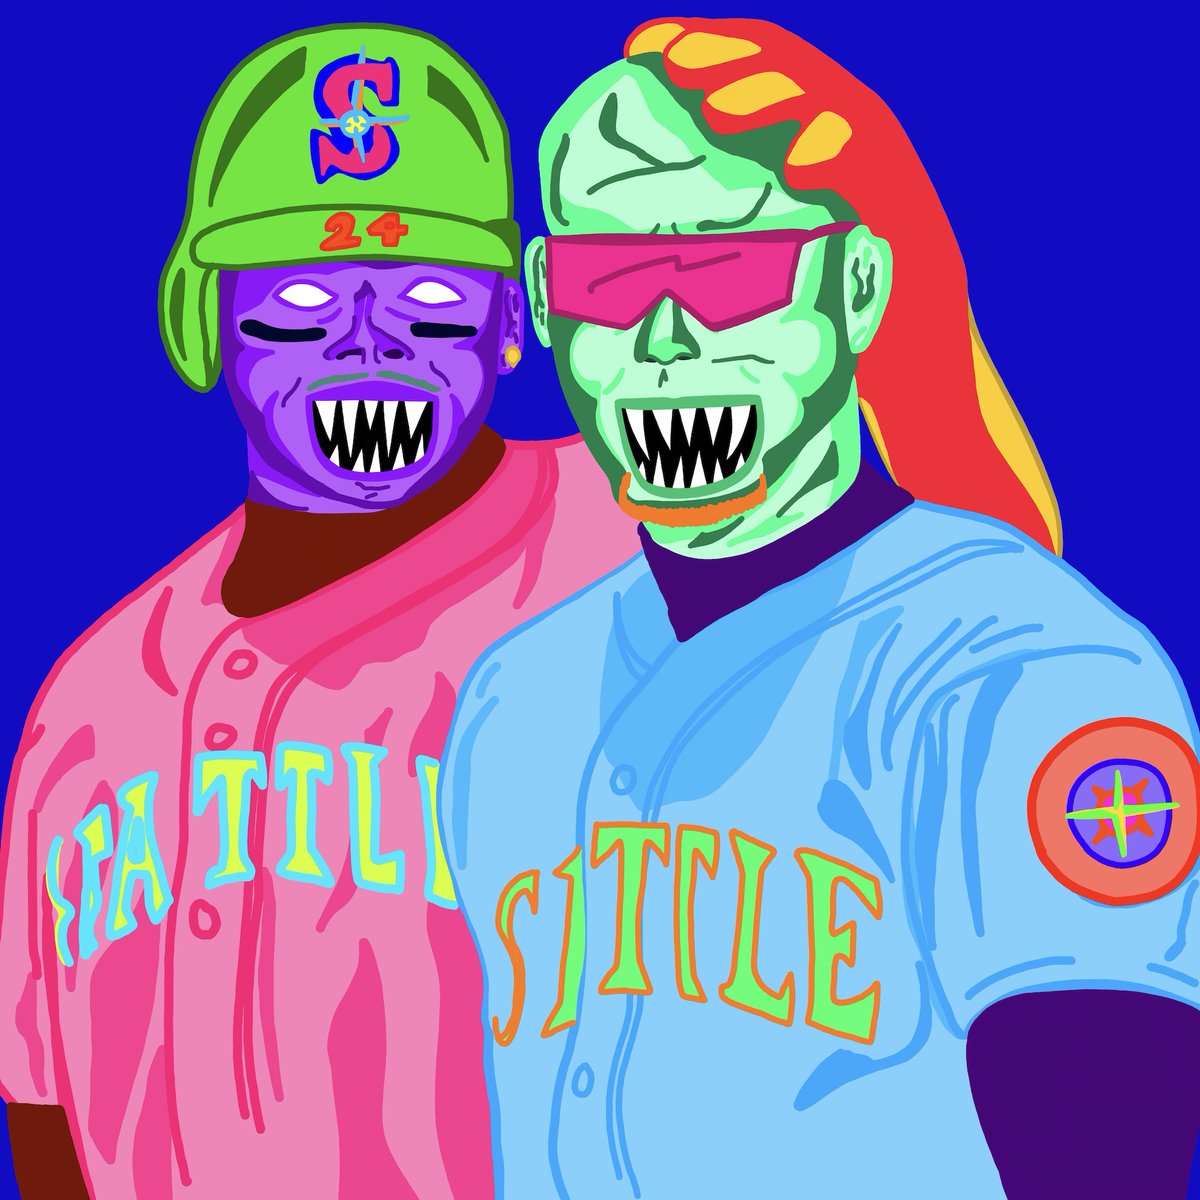 With BlenderOfZombie about to drop BOZ Card No.5 and sharing the collab card teaser, I thought it would be a good time to show the art I created. BOZ sent me his work in progress painting (his final painting turned out so rad!) of #KenGriffeyJr and #JayBuhner for me to play with.